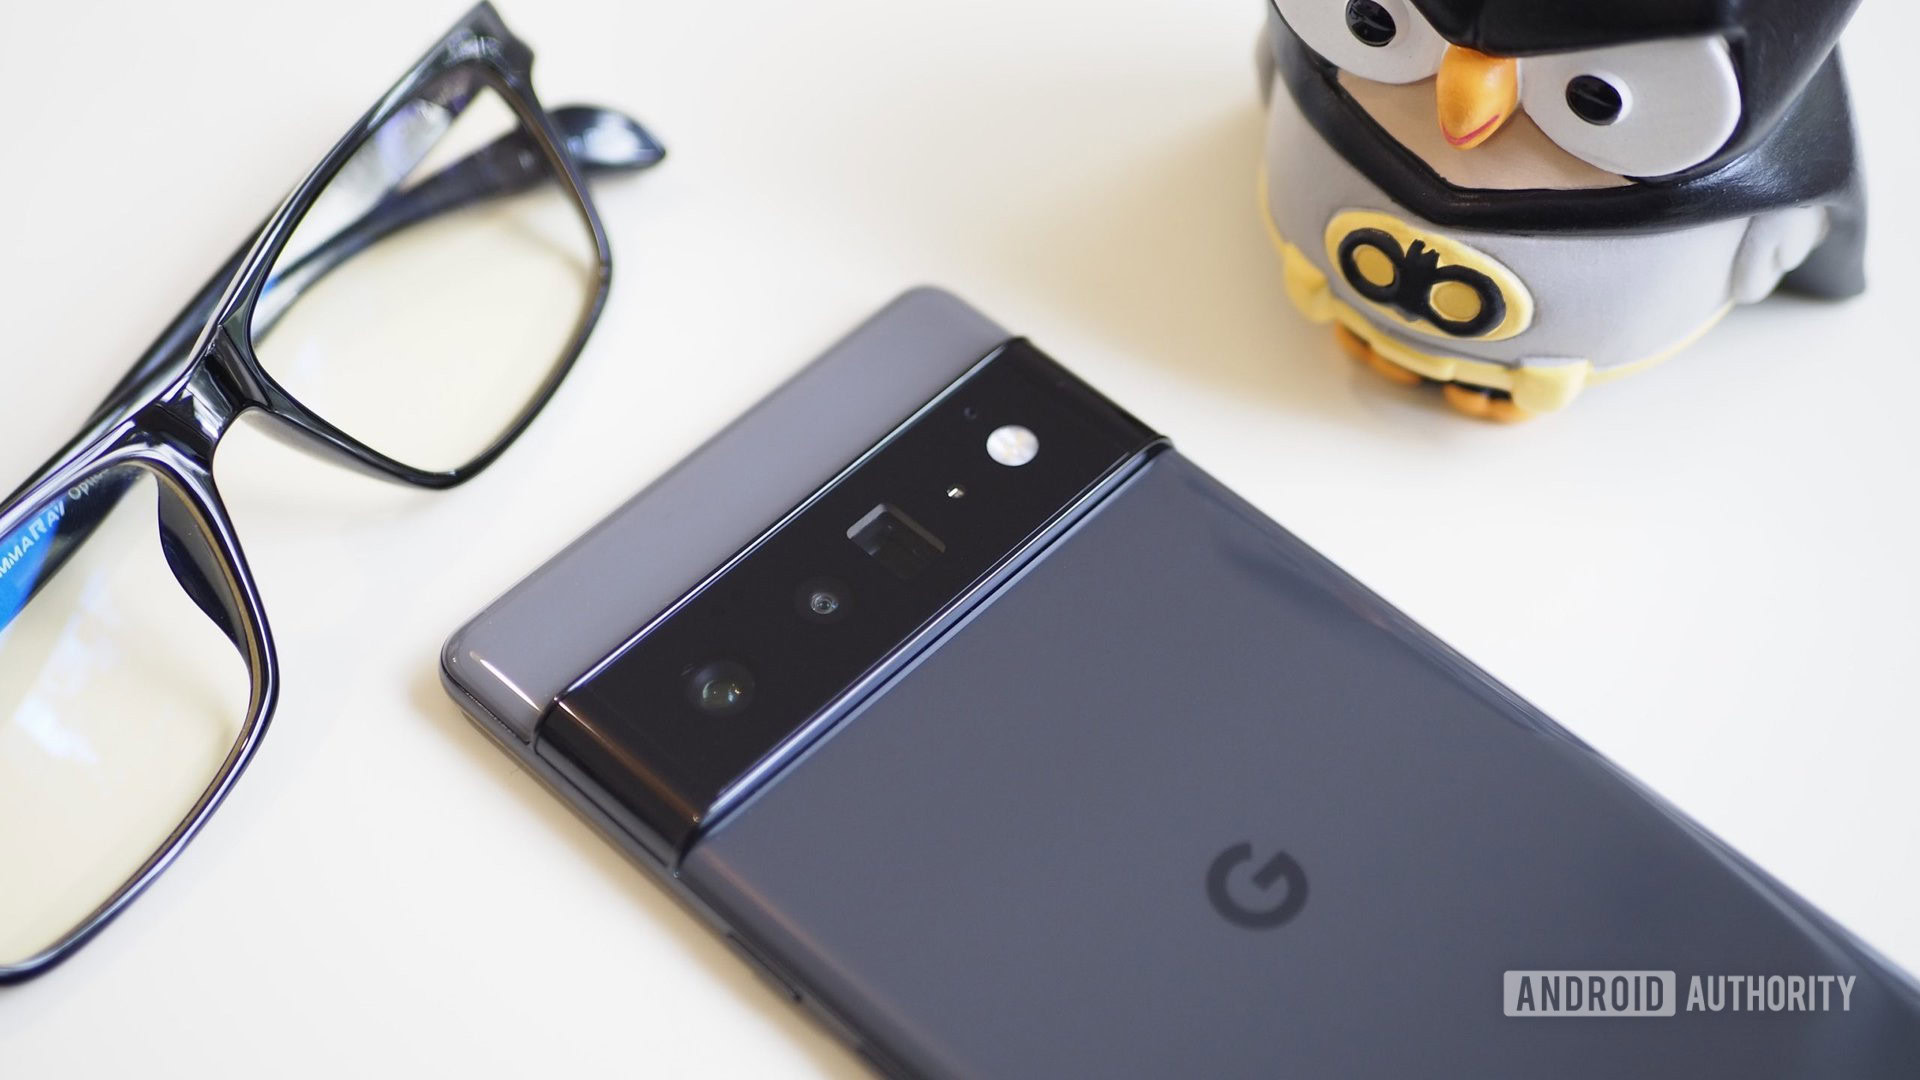 The face of the Google Pixel 6 Pro is next to the glasses and a statue of Batman.